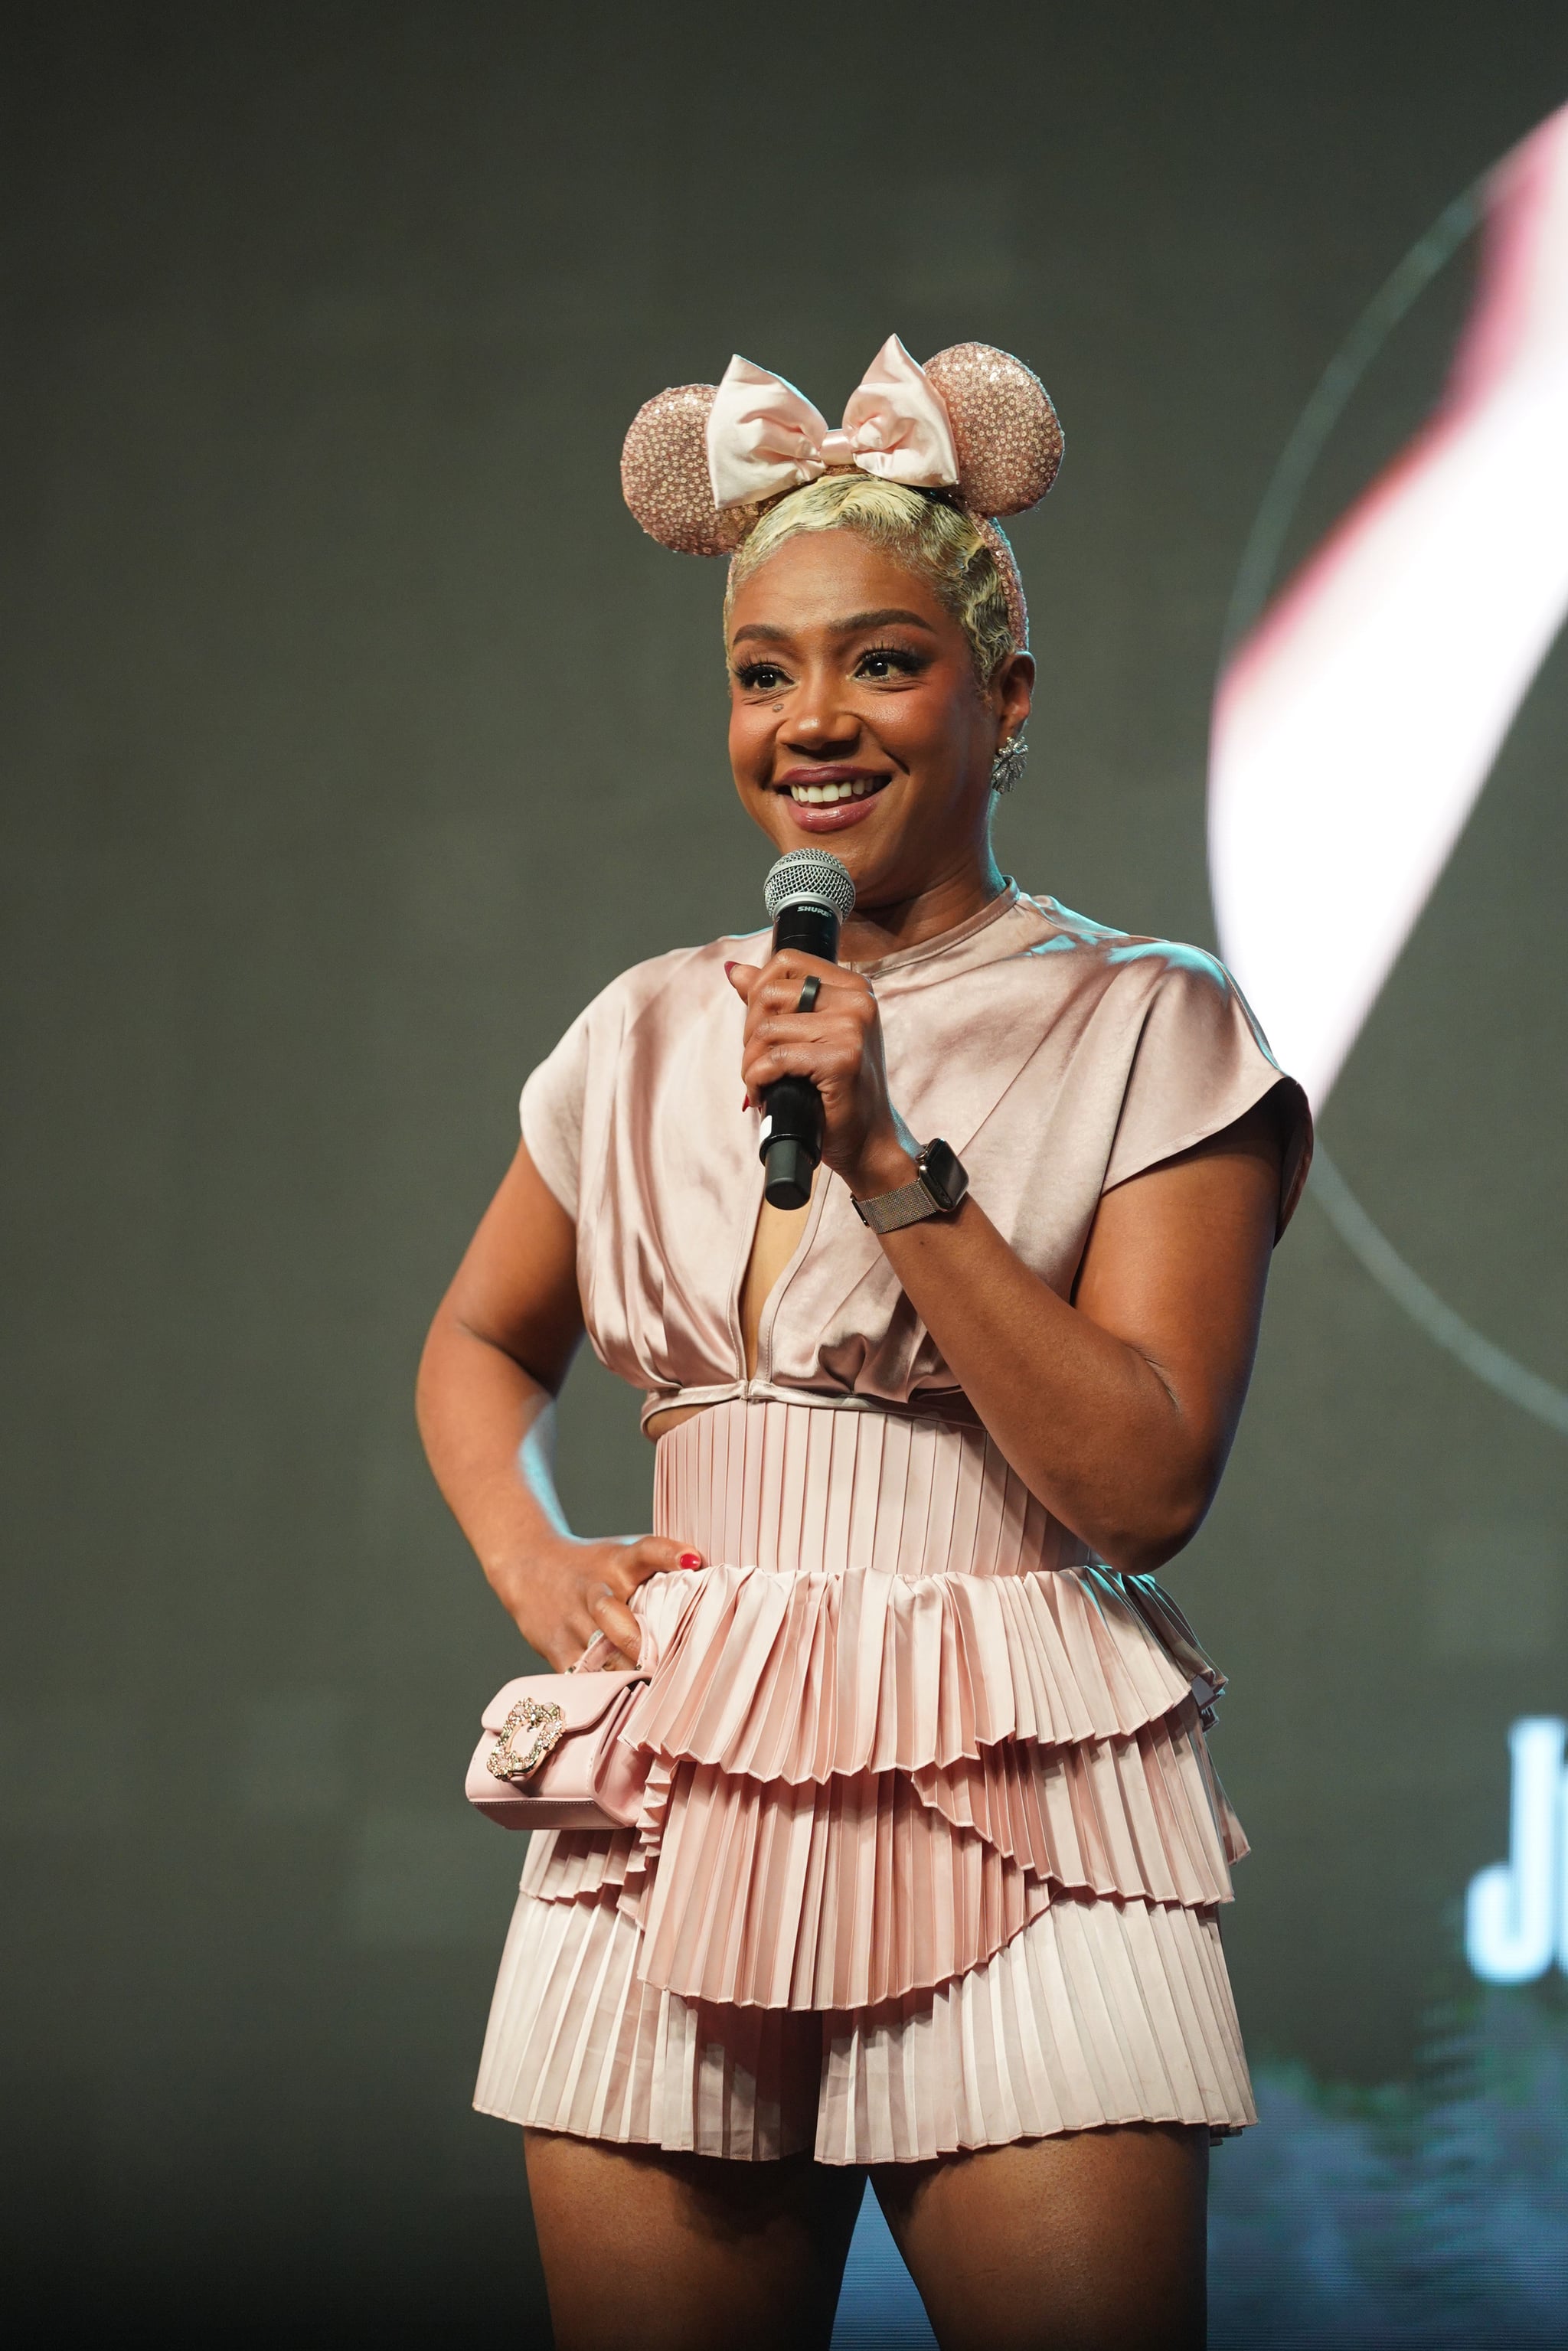 NEW ORLEANS, LOUISIANA - JULY 01: Tiffany Haddish speaks onstage at the 2023 ESSENCE Festival Of Culture™ at Ernest N. Morial Convention Centre on July 01, 2023 in New Orleans, Louisiana. (Photo by Erika Goldring/Getty Images FOR ESSENCE)